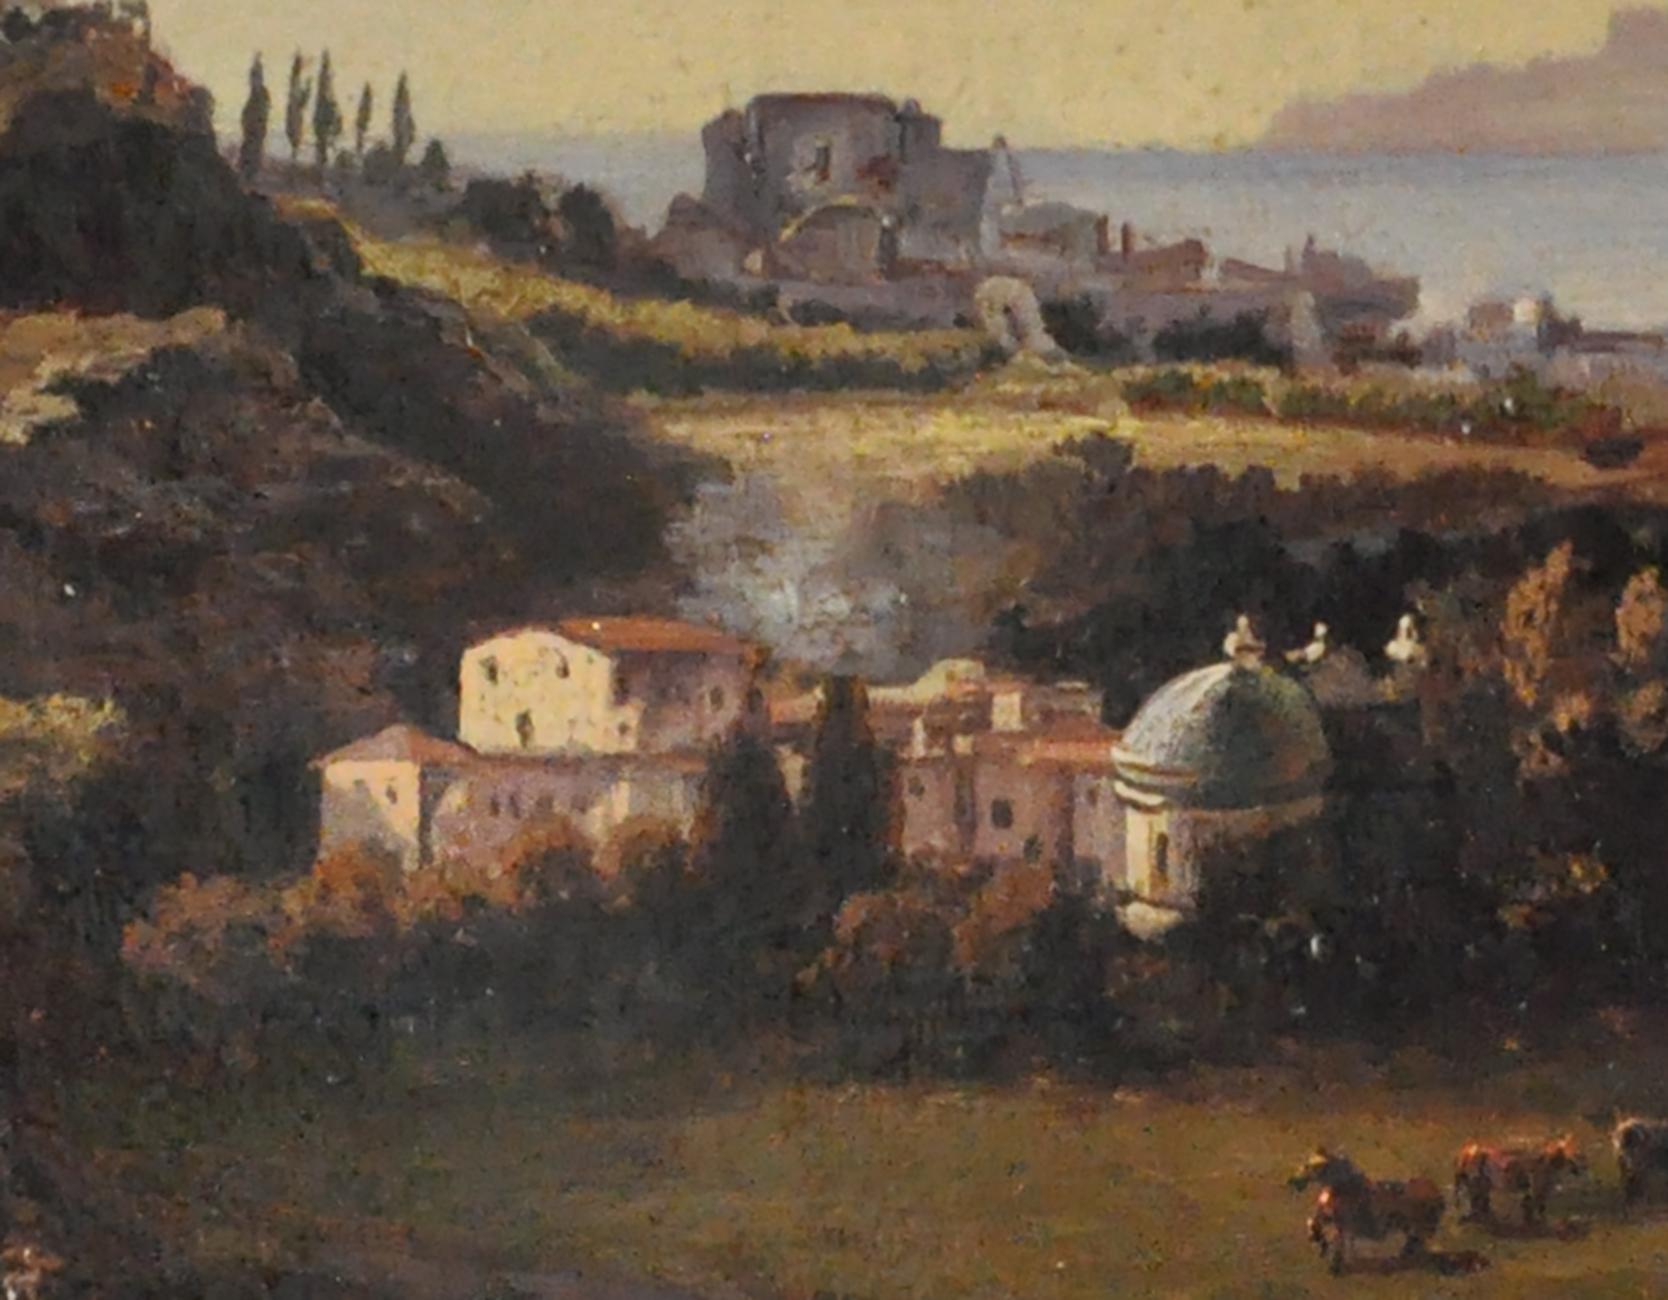 Landscape - Pietro Colonna Italia 2007 - Oil on canvas cm. 30x60
Frame available on request from our workshop.